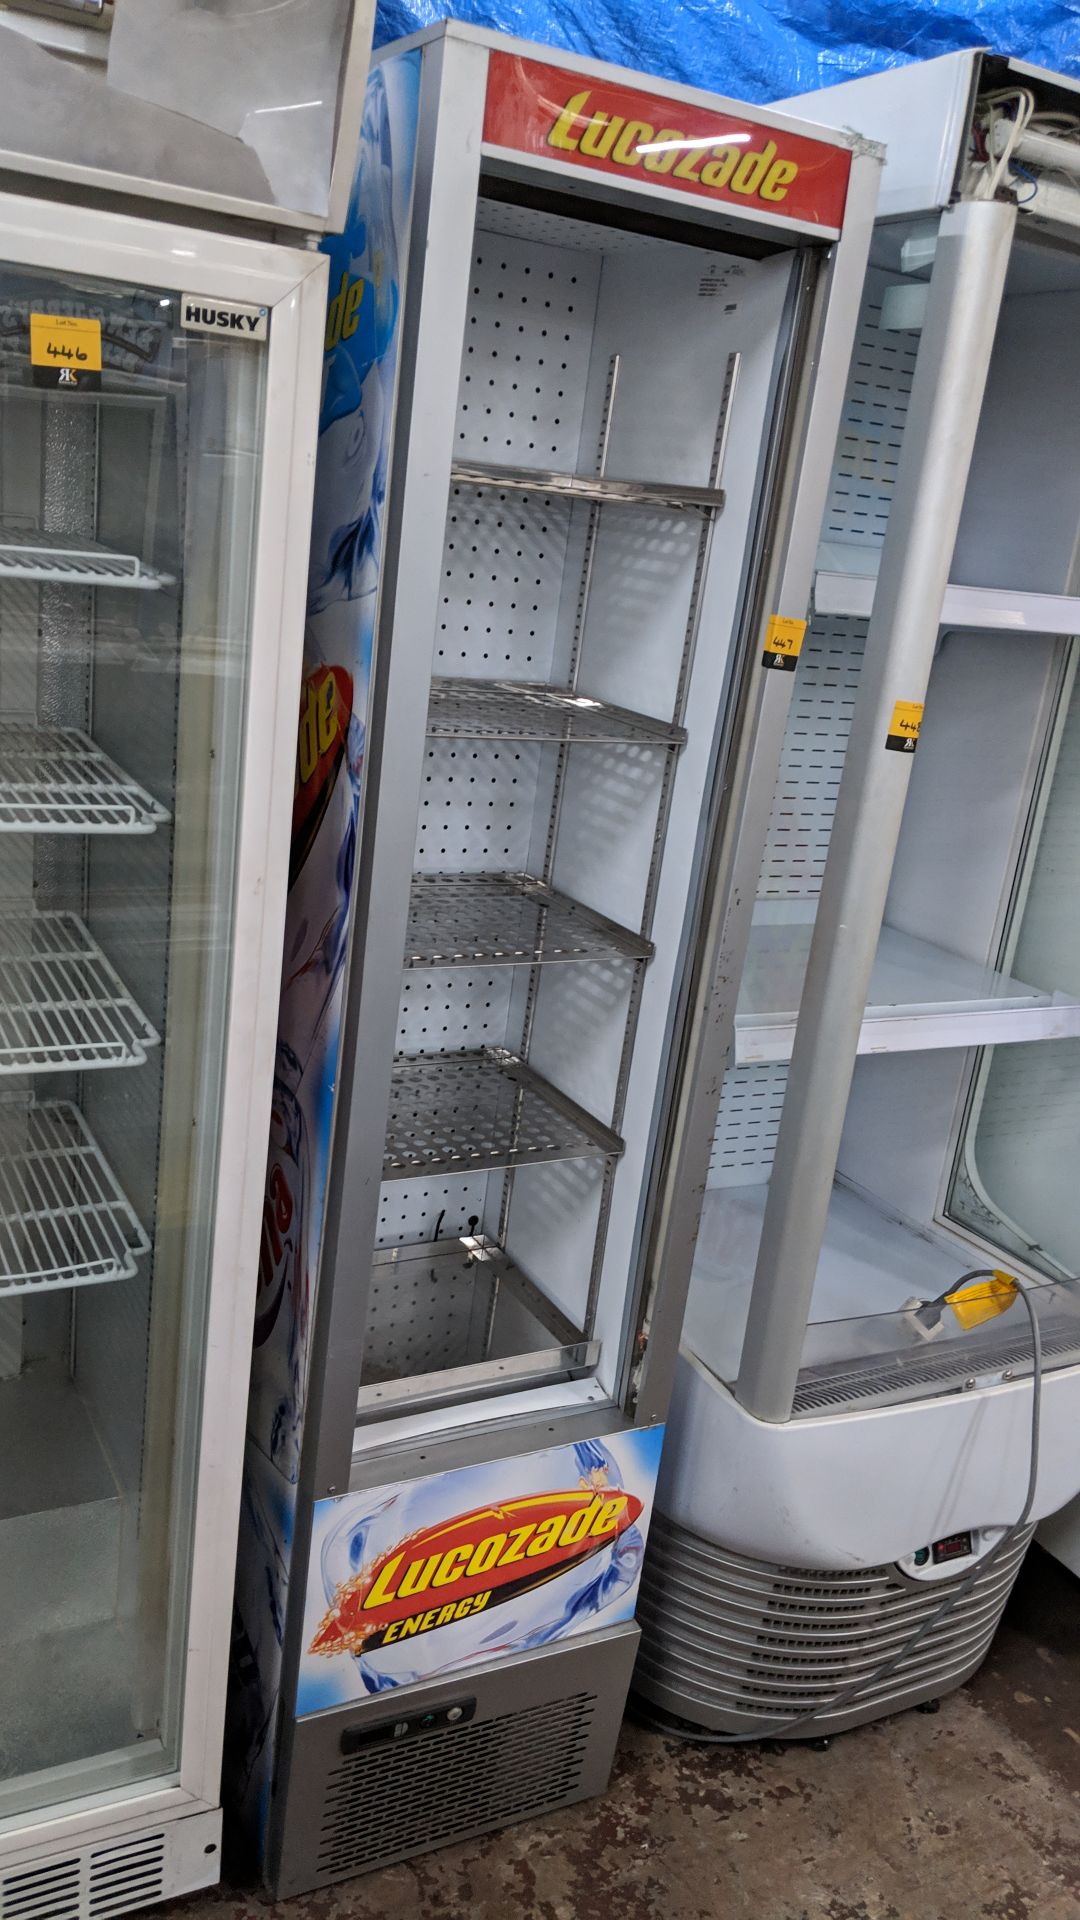 Slimline open front display fridge IMPORTANT: Please remember goods successfully bid upon must be